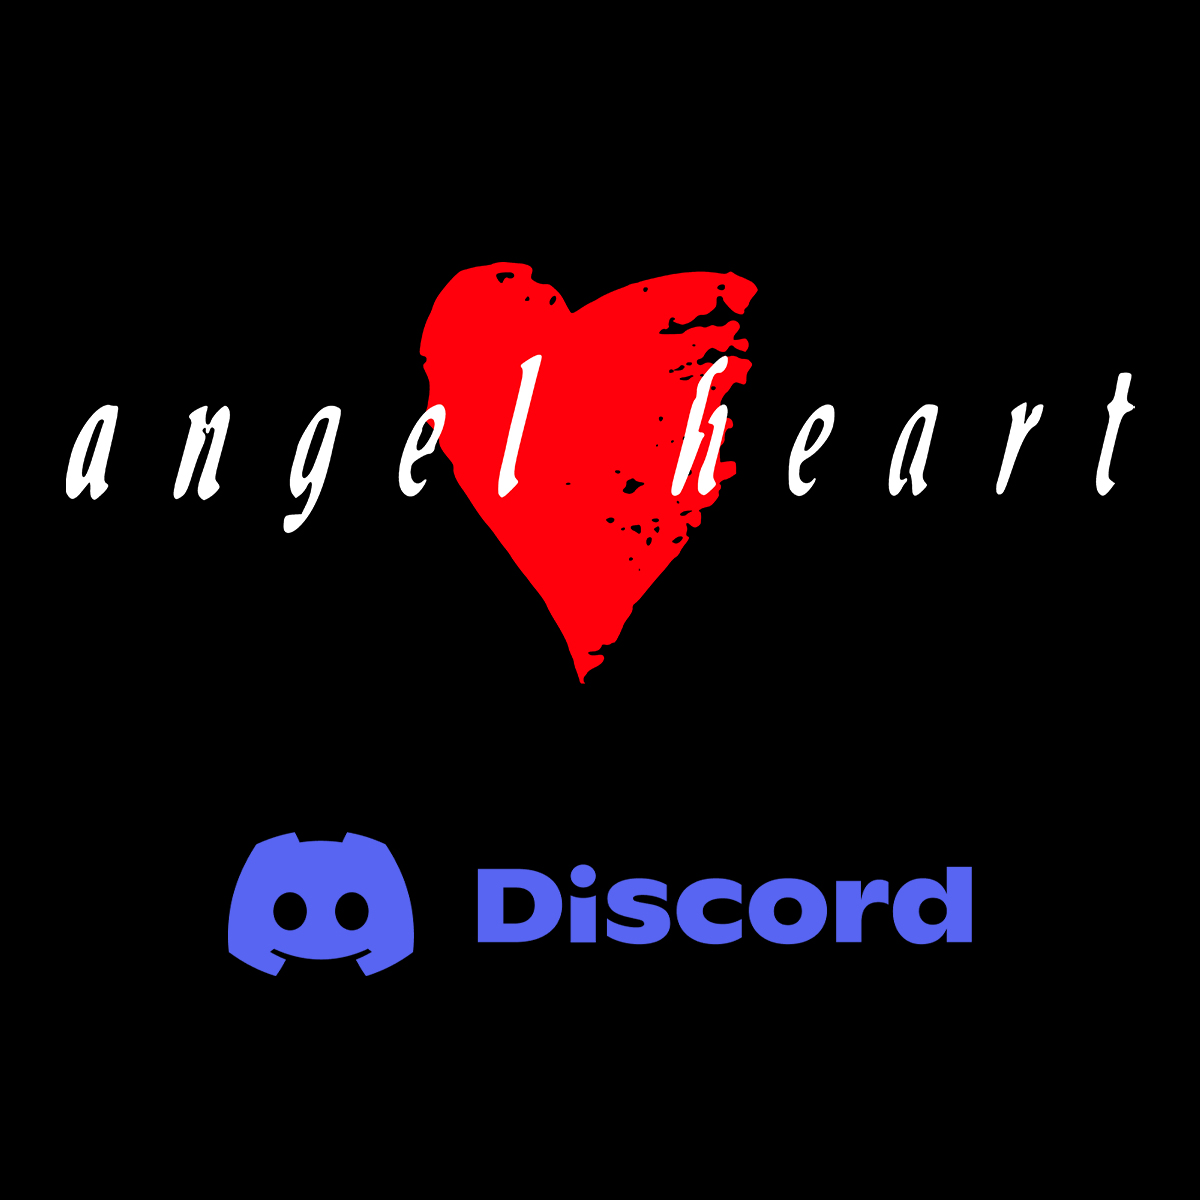 Getting ready for an #AngelHeart💖 listening party to mark the album's 30th anniversary! Join us in the Discord server: bonnietyler.com/fan-club Starts in just over 1 hours' time!